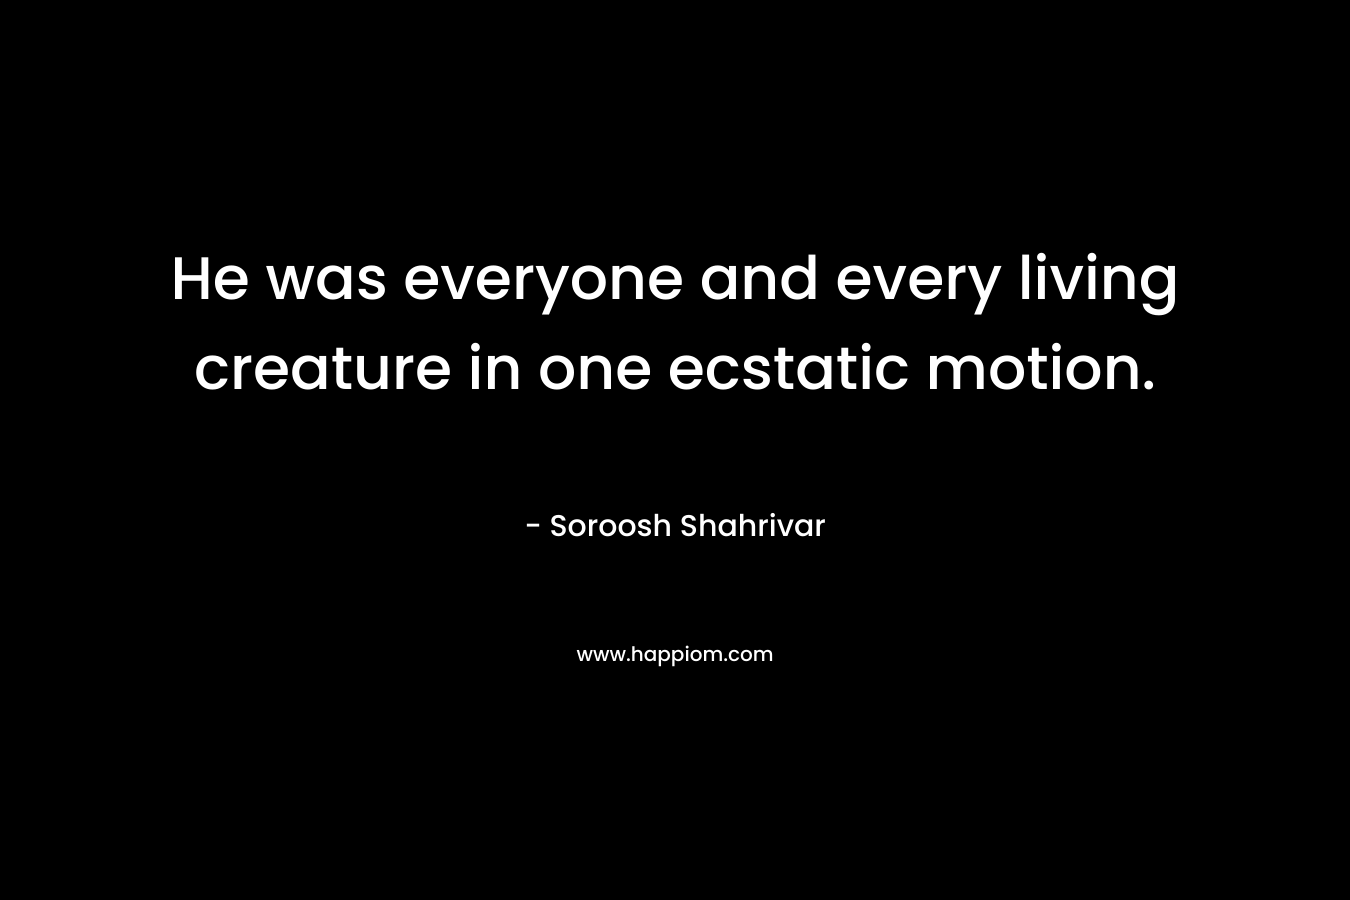 He was everyone and every living creature in one ecstatic motion. – Soroosh Shahrivar